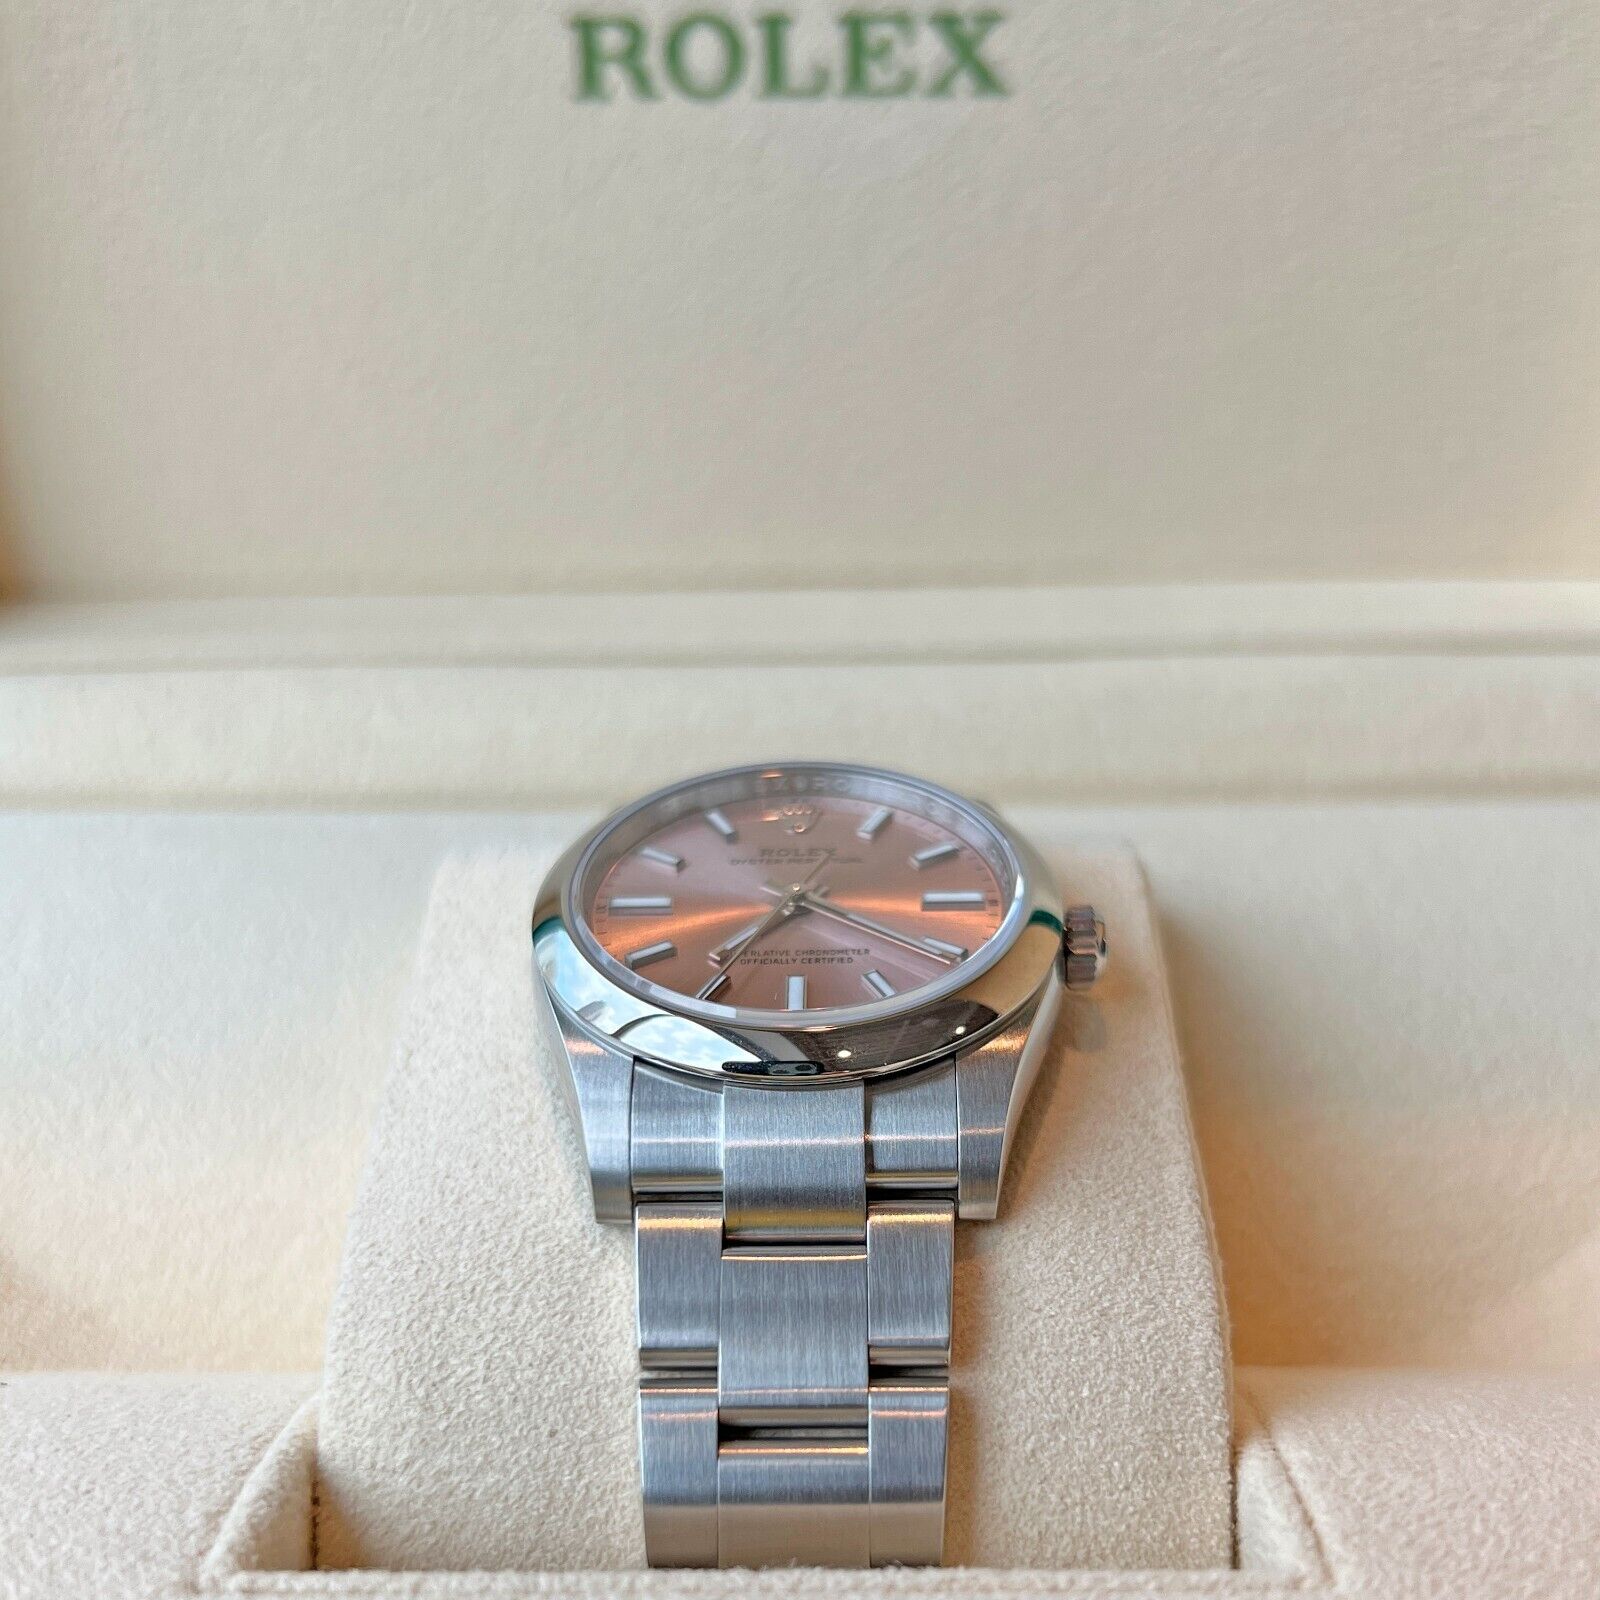 2022 Rolex Oyster Perpetual ~ 34mm ~ Pink Dial - Ticking Way